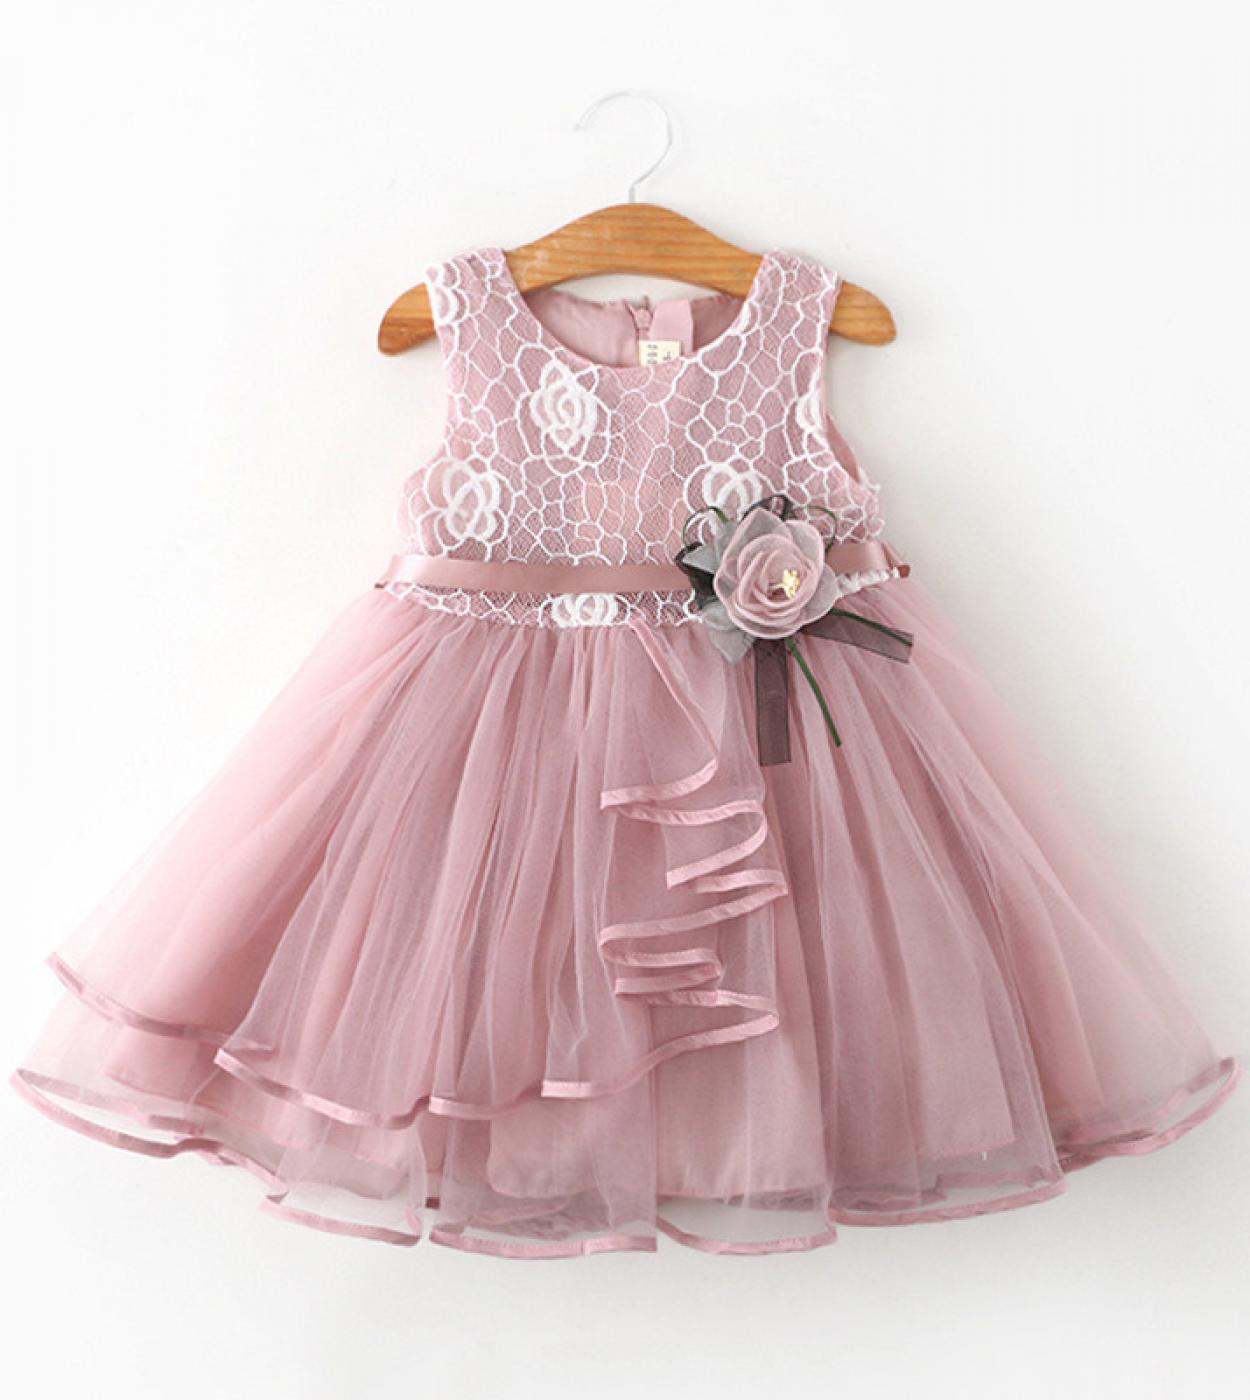 Flower Newborn Baby Dress New Summer Cute Baby Girls Clothes Tulle Lace Infant Xmas Party Clothing 1 Year Birthday Dress